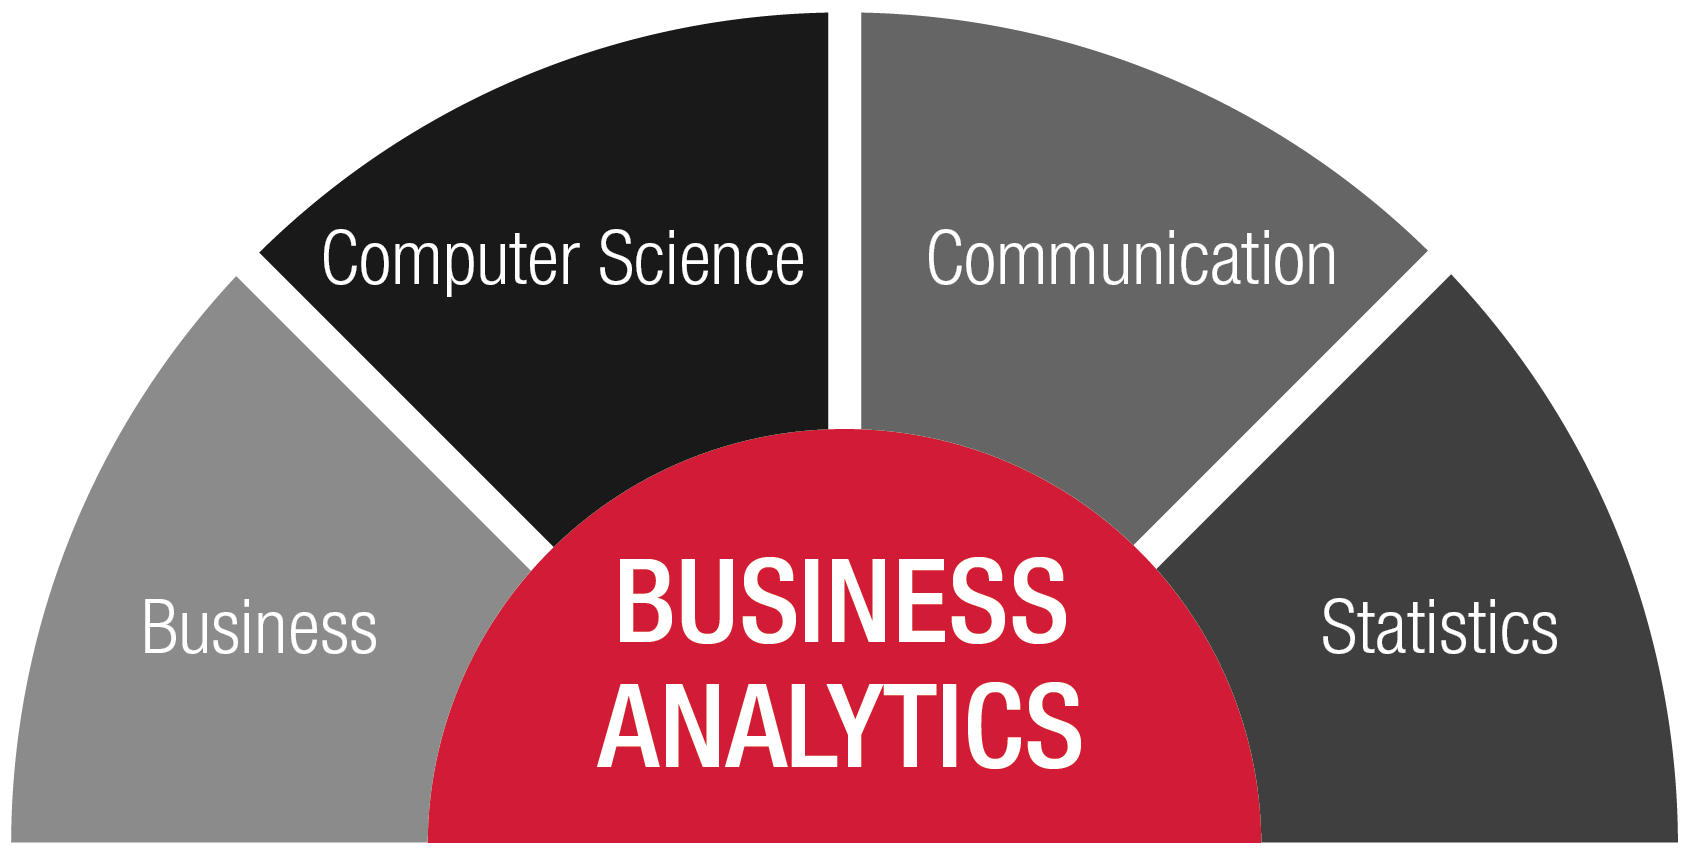 A degree in Business Analytics emphasizes skills in business, computer science, communication and statistics.